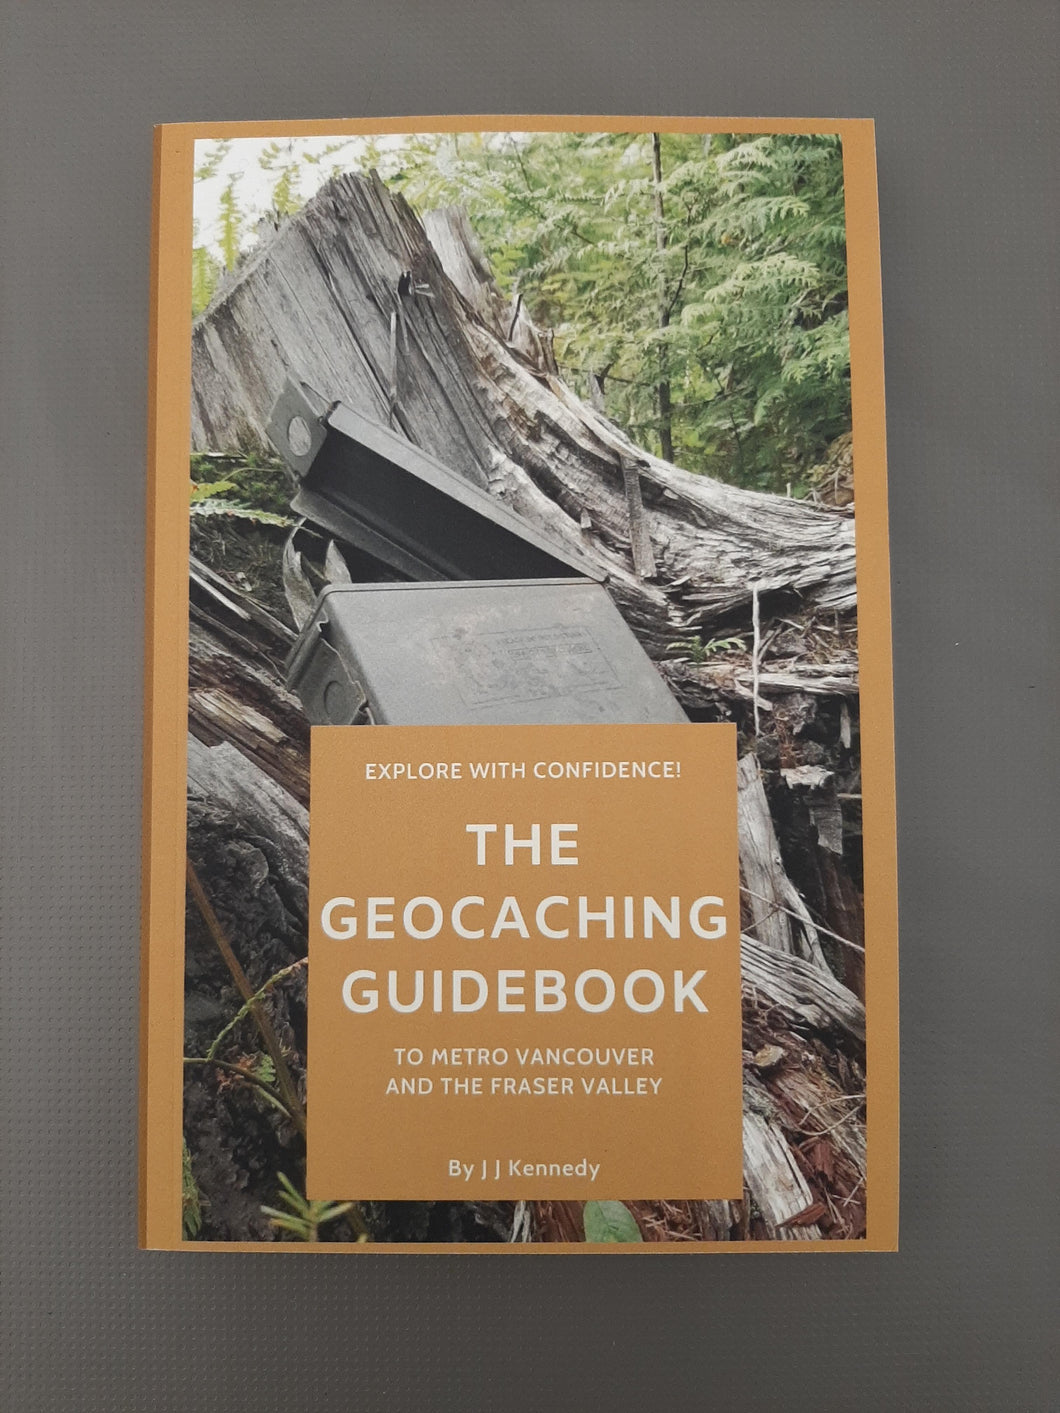 The Geocaching Guidebook To Metro Vancouver and the Fraser Valley